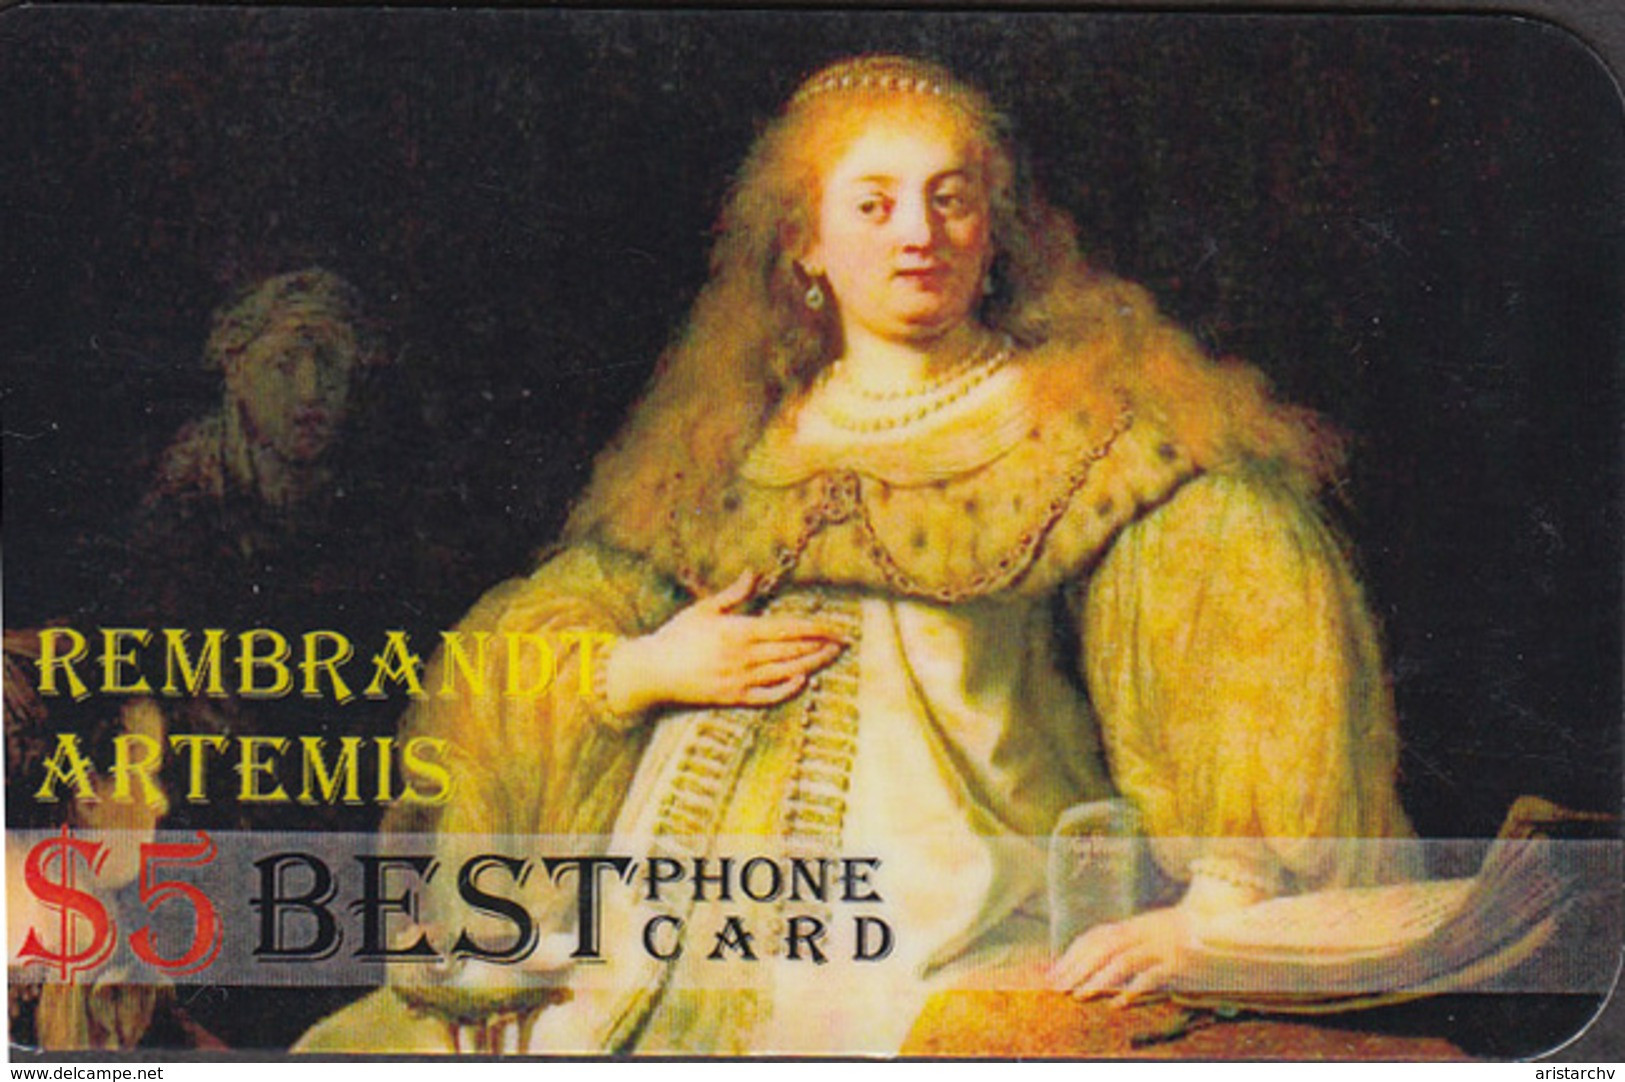 ART REMBRANDT SET OF 4 PHONE CARDS - Painting